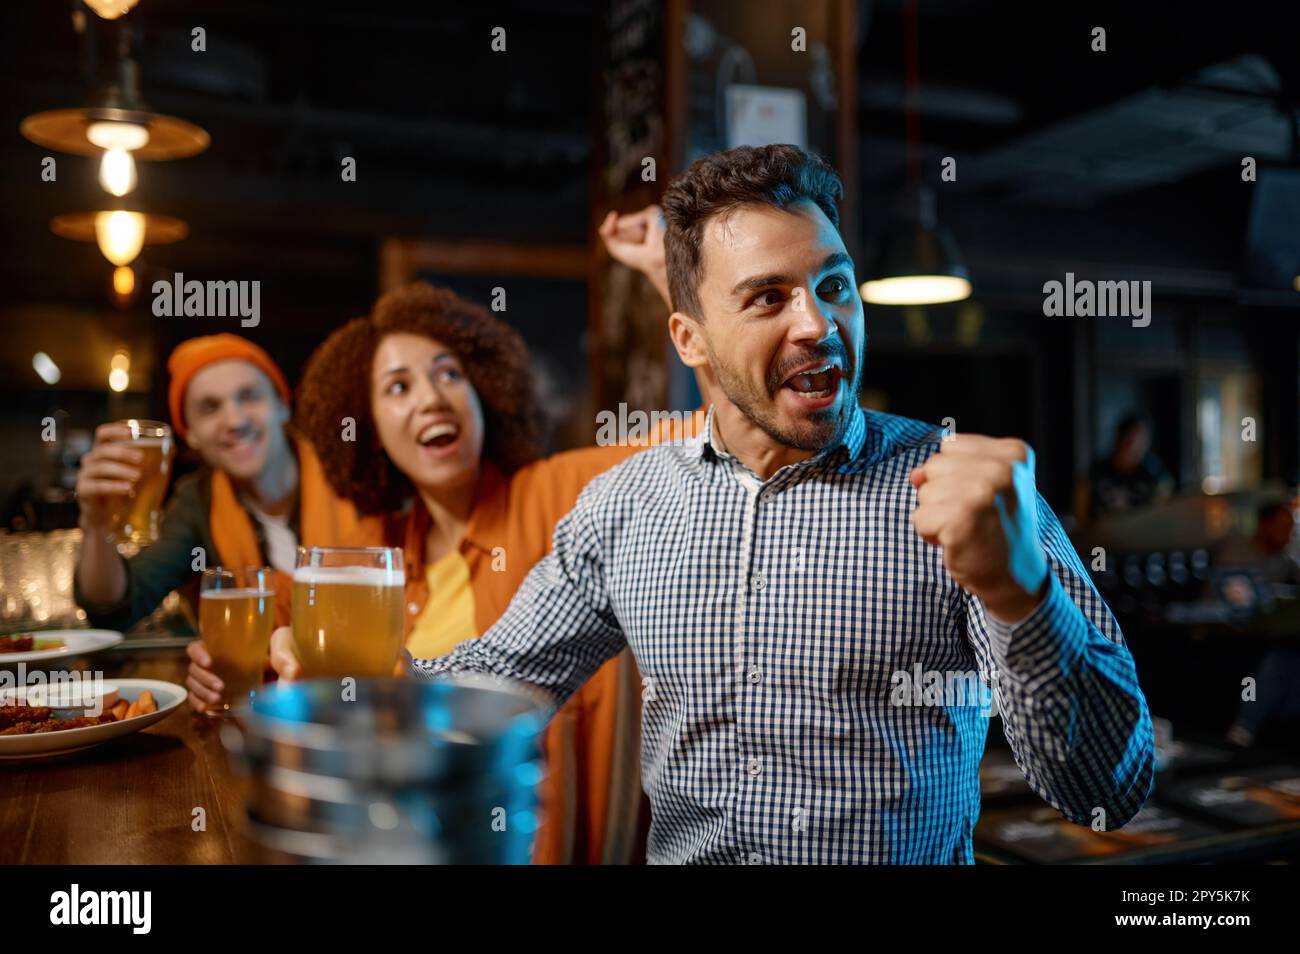 Guys drinking craft beer and watching football game Stock Photo